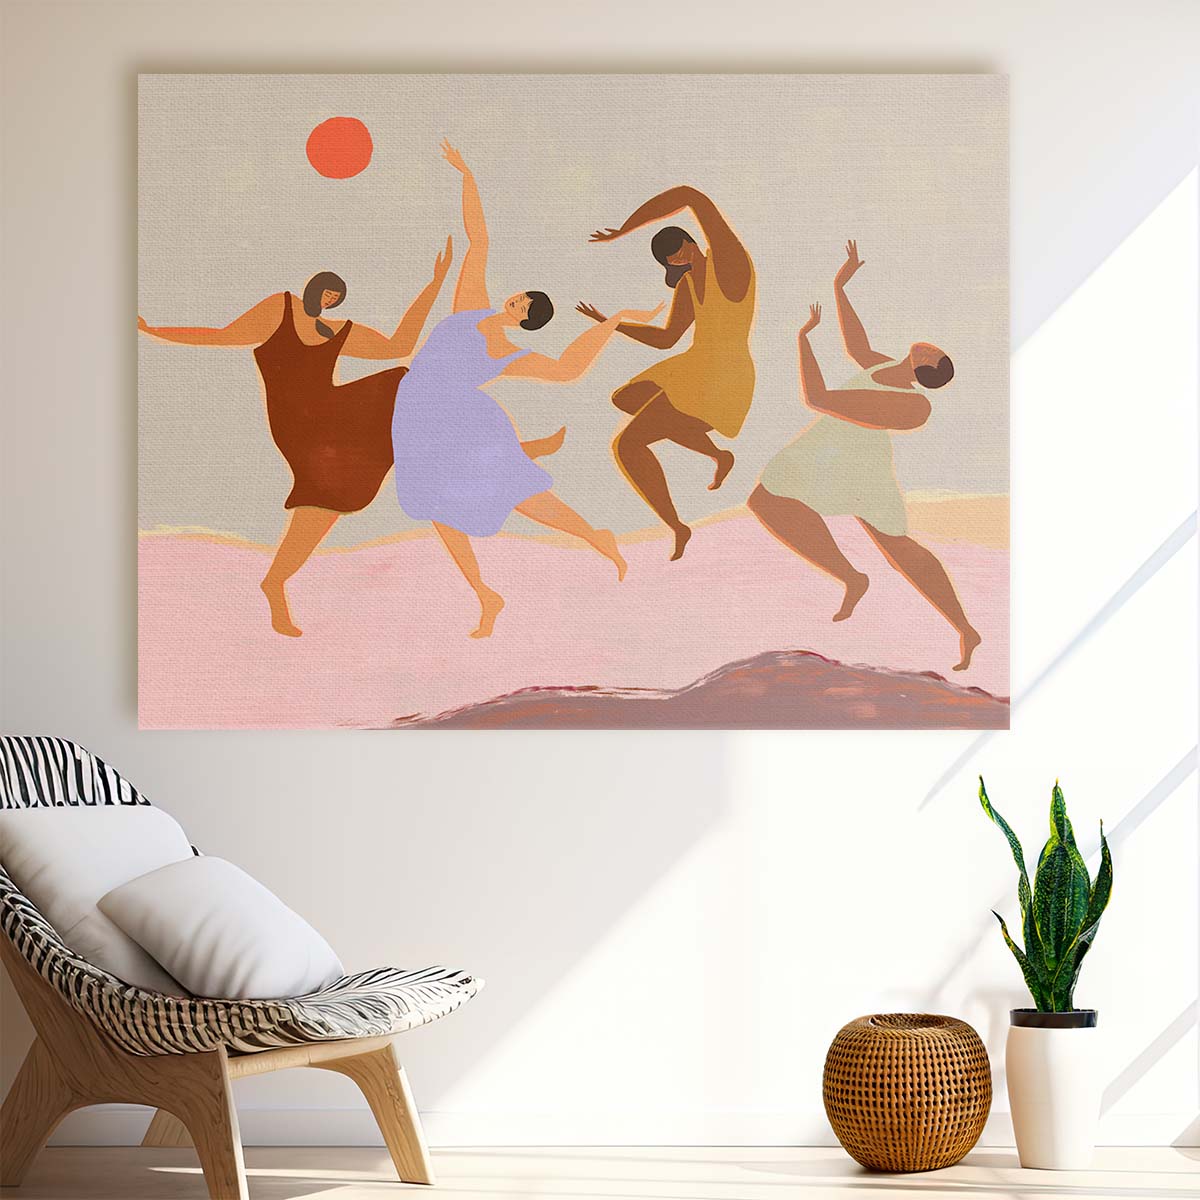 Colorful Dance of Togetherness Women Portrait Wall Art by Luxuriance Designs. Made in USA.